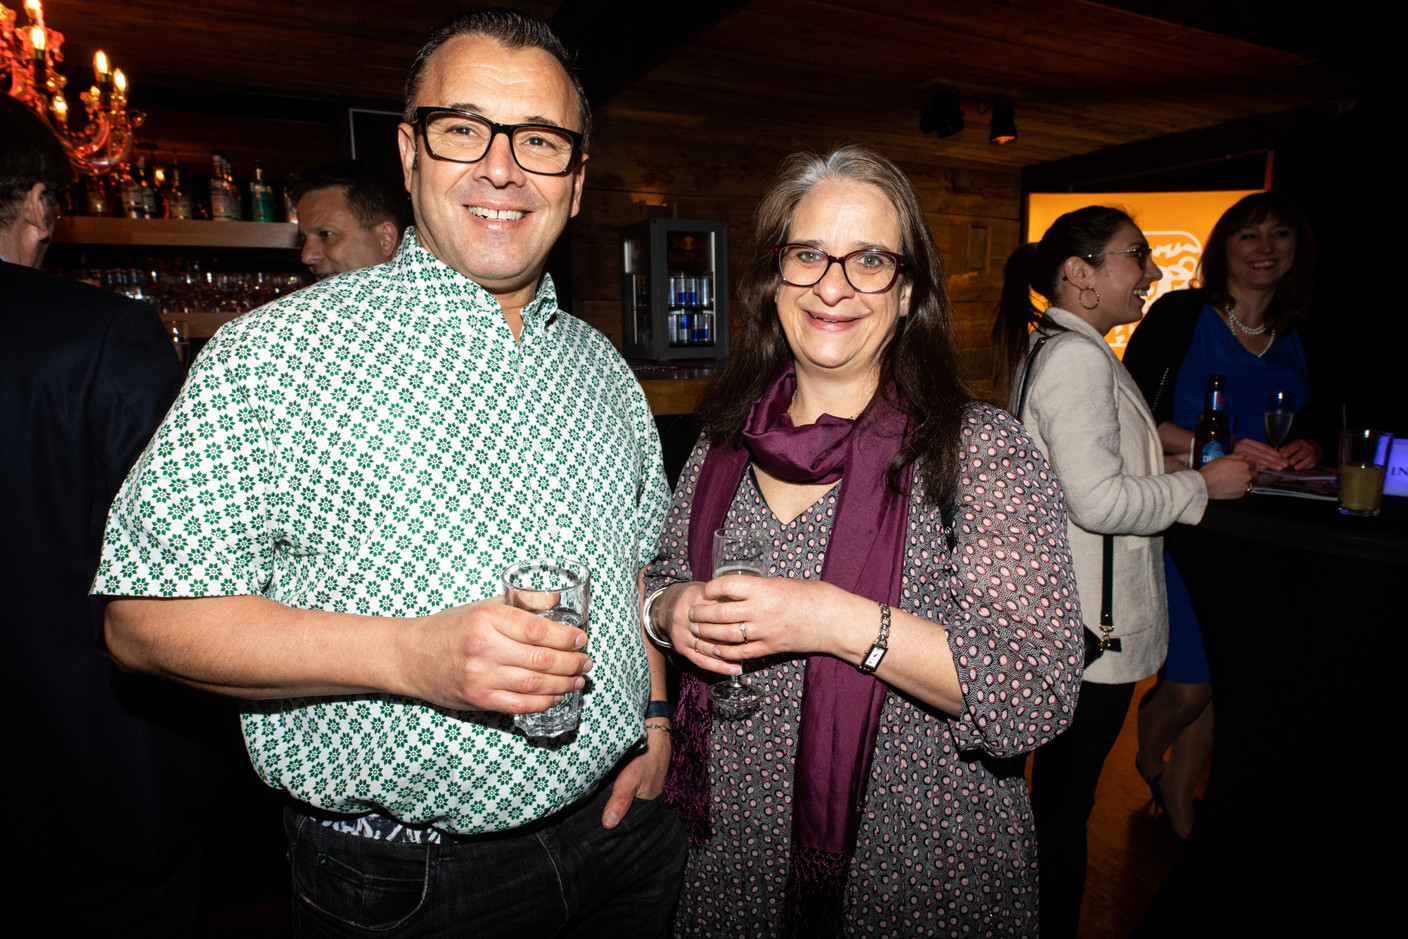 Louise Edworthy (British Chamber of Commerce for Luxembourg), on right, seen at Delano’s 12th anniversary party, 23 February 2023. Photo: Eva Krins/Maison Moderne